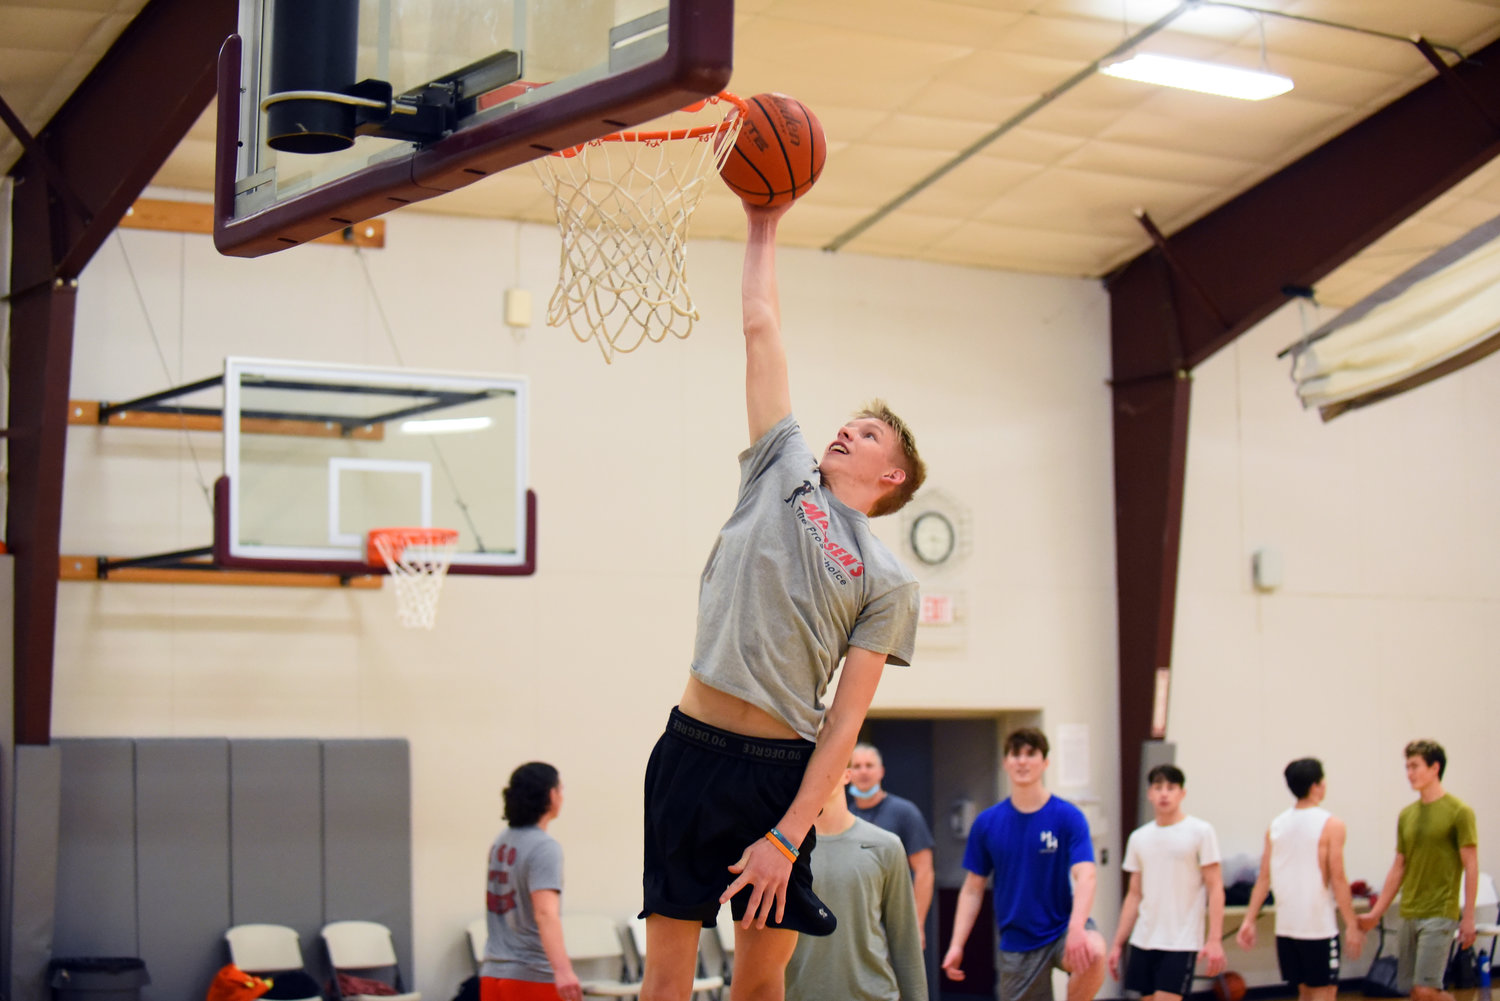 W.F. West's Evan Tornow goes for a dunk during practice Nov. 18.